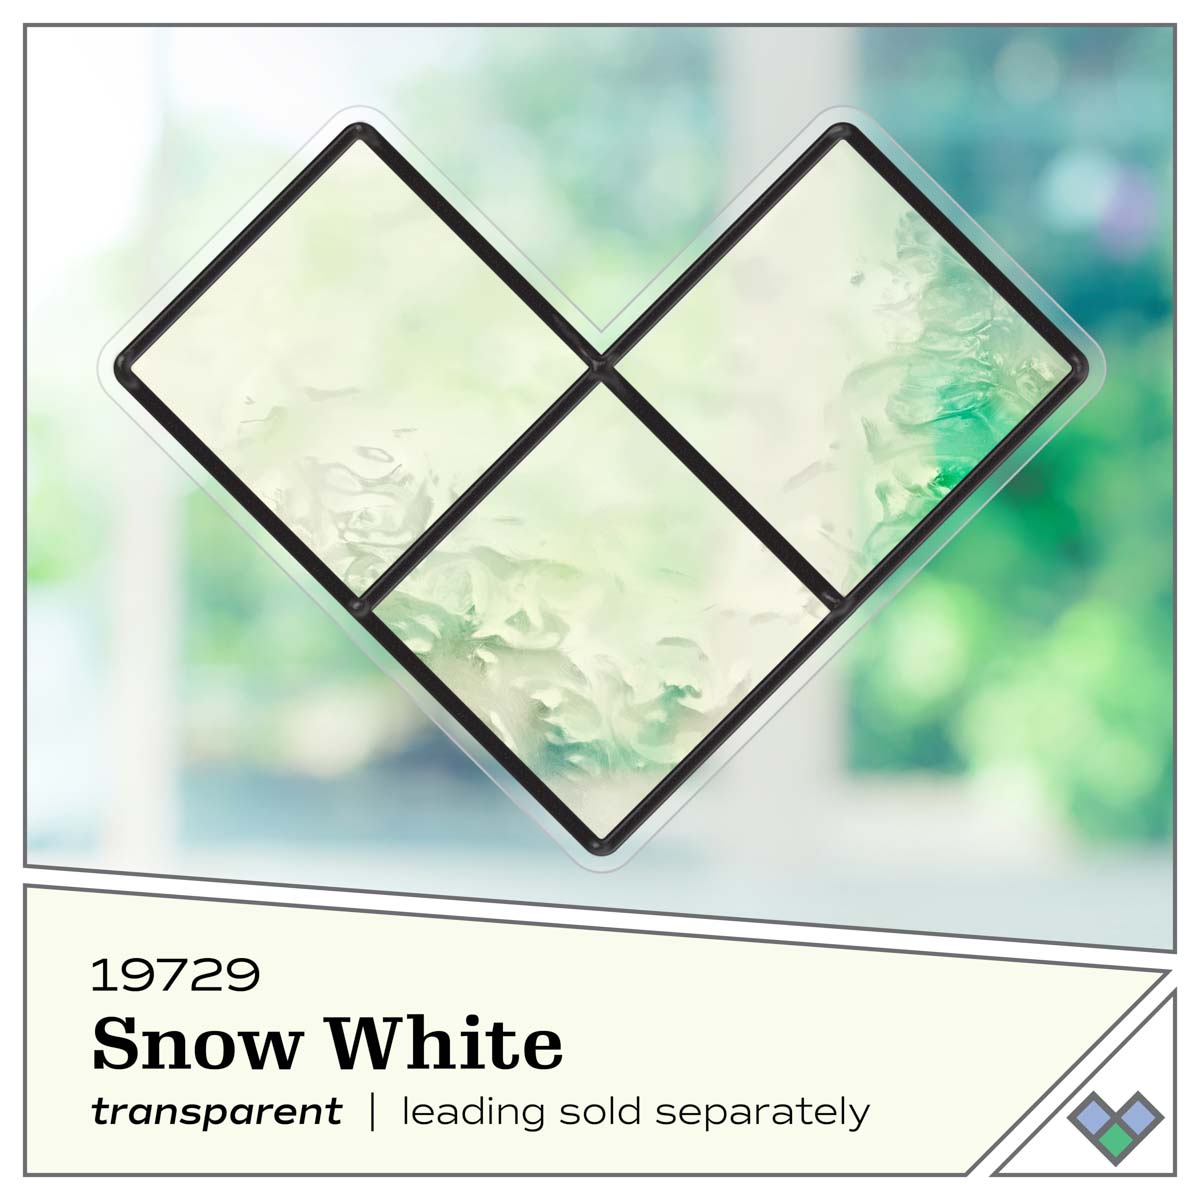 Gallery Glass ® Stained Glass Effect Paint - Snow White, 2 oz. - 19729